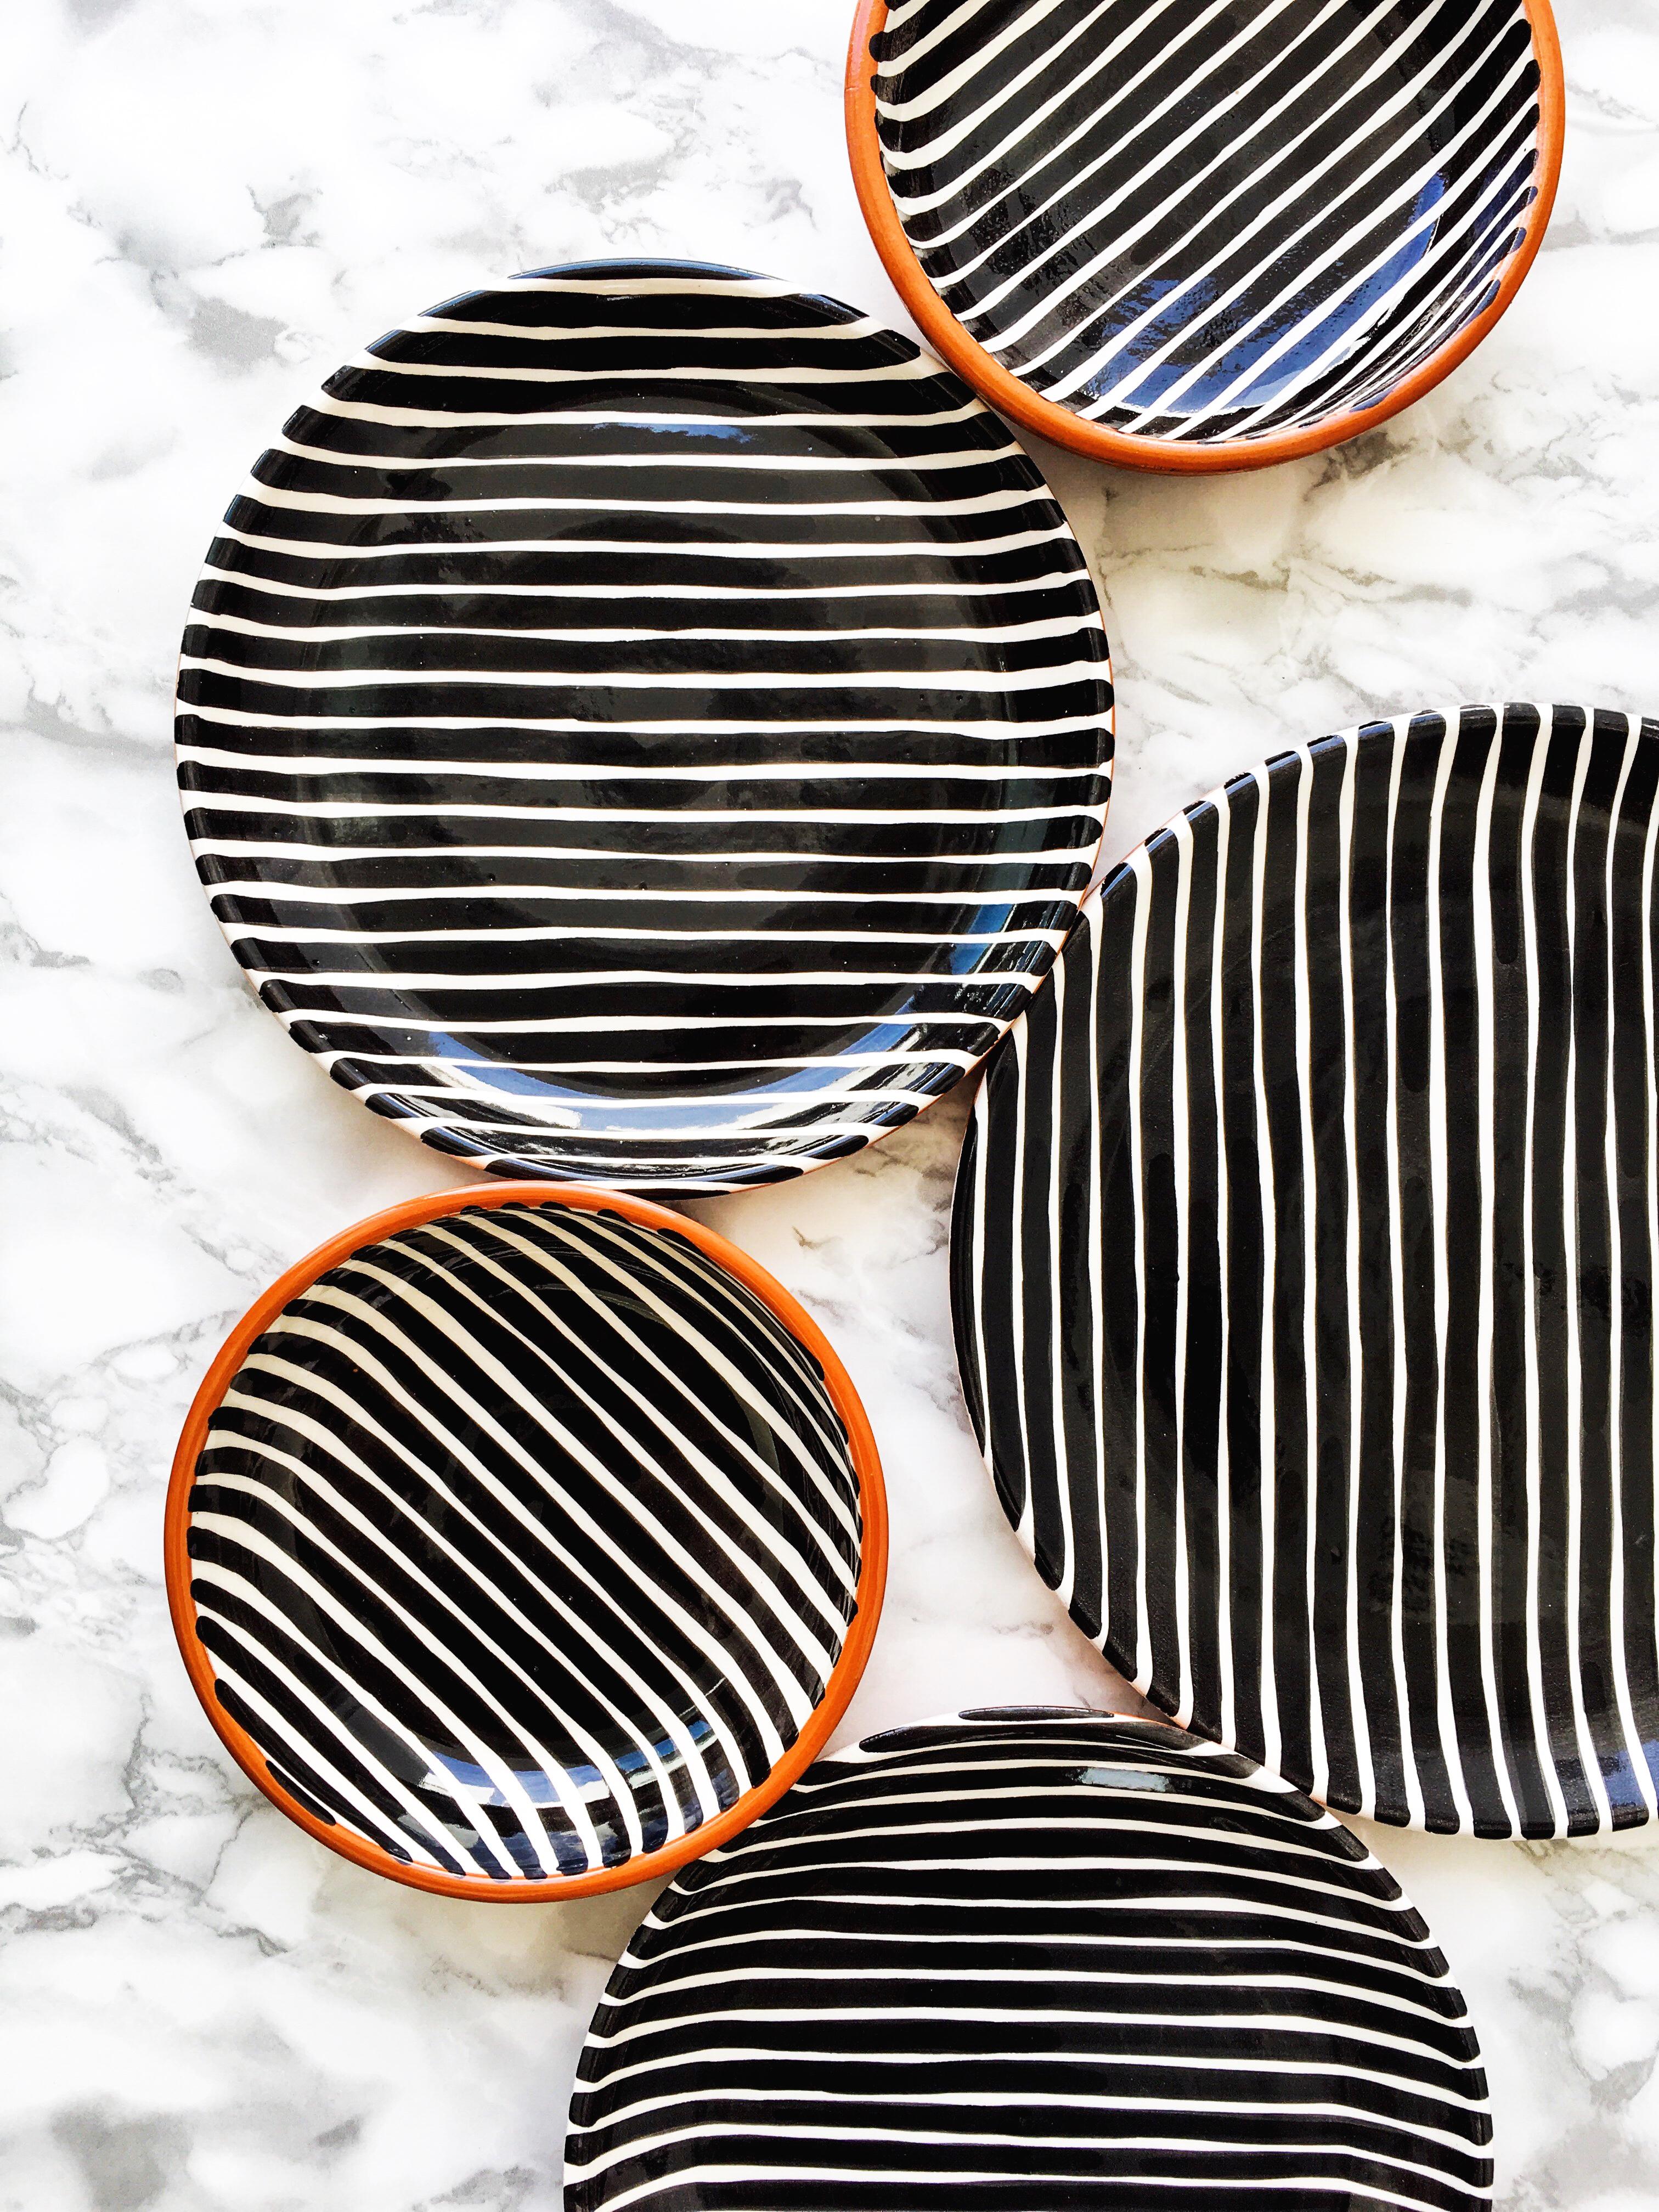 Contemporary Handmade Black and White Stripe Ceramic Salad Plates, in Stock For Sale